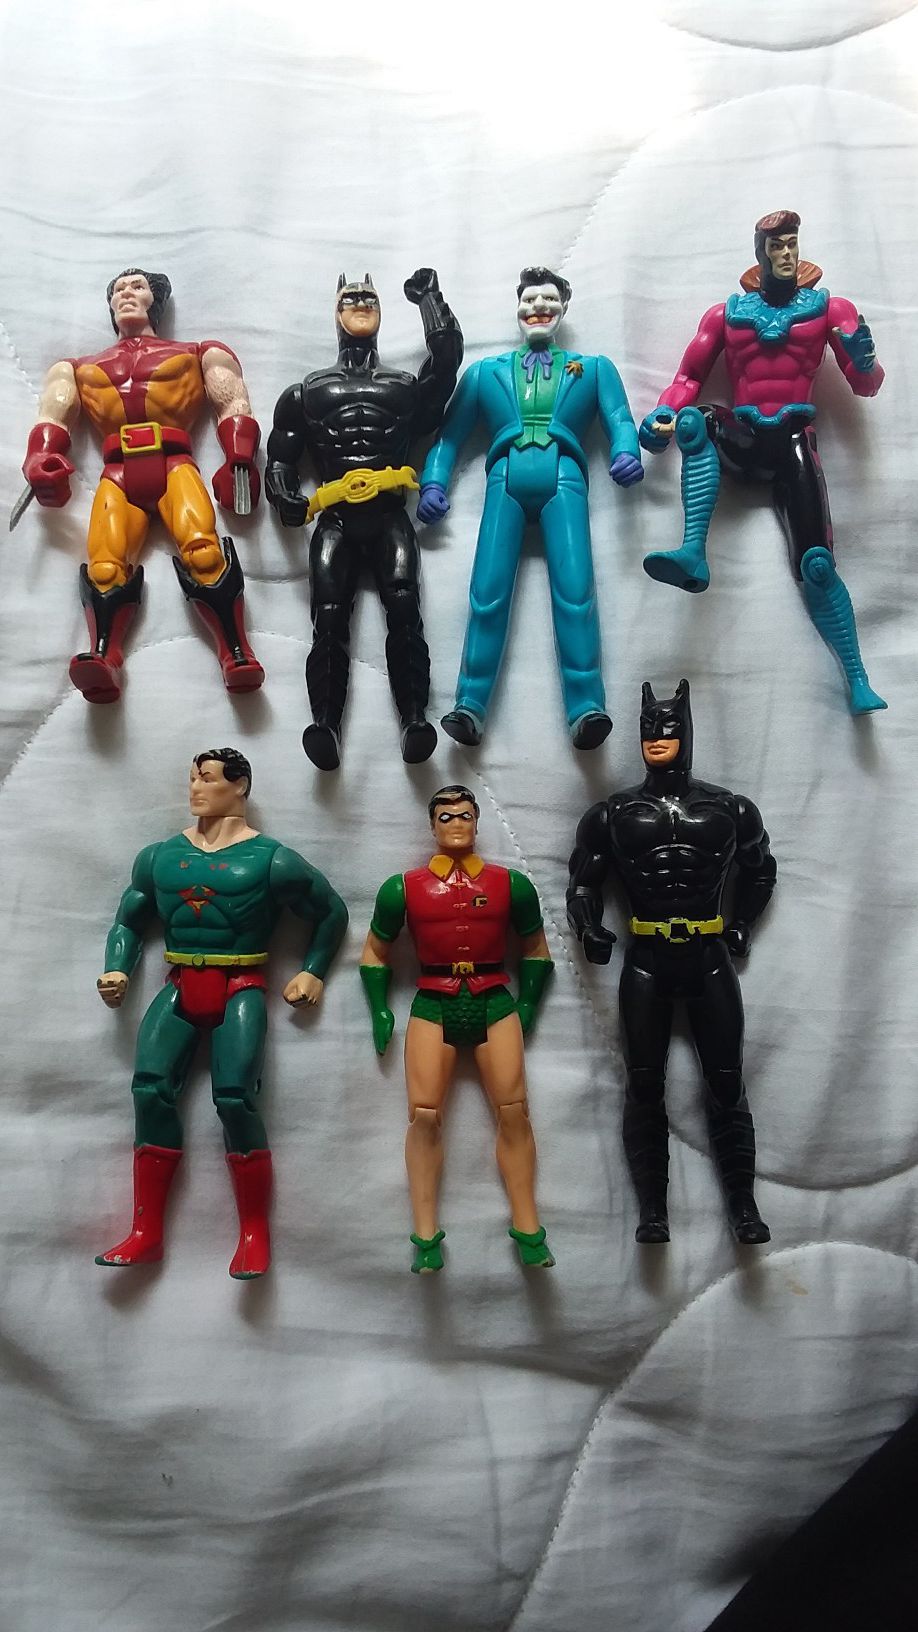 DC&Marvel figures from 90's